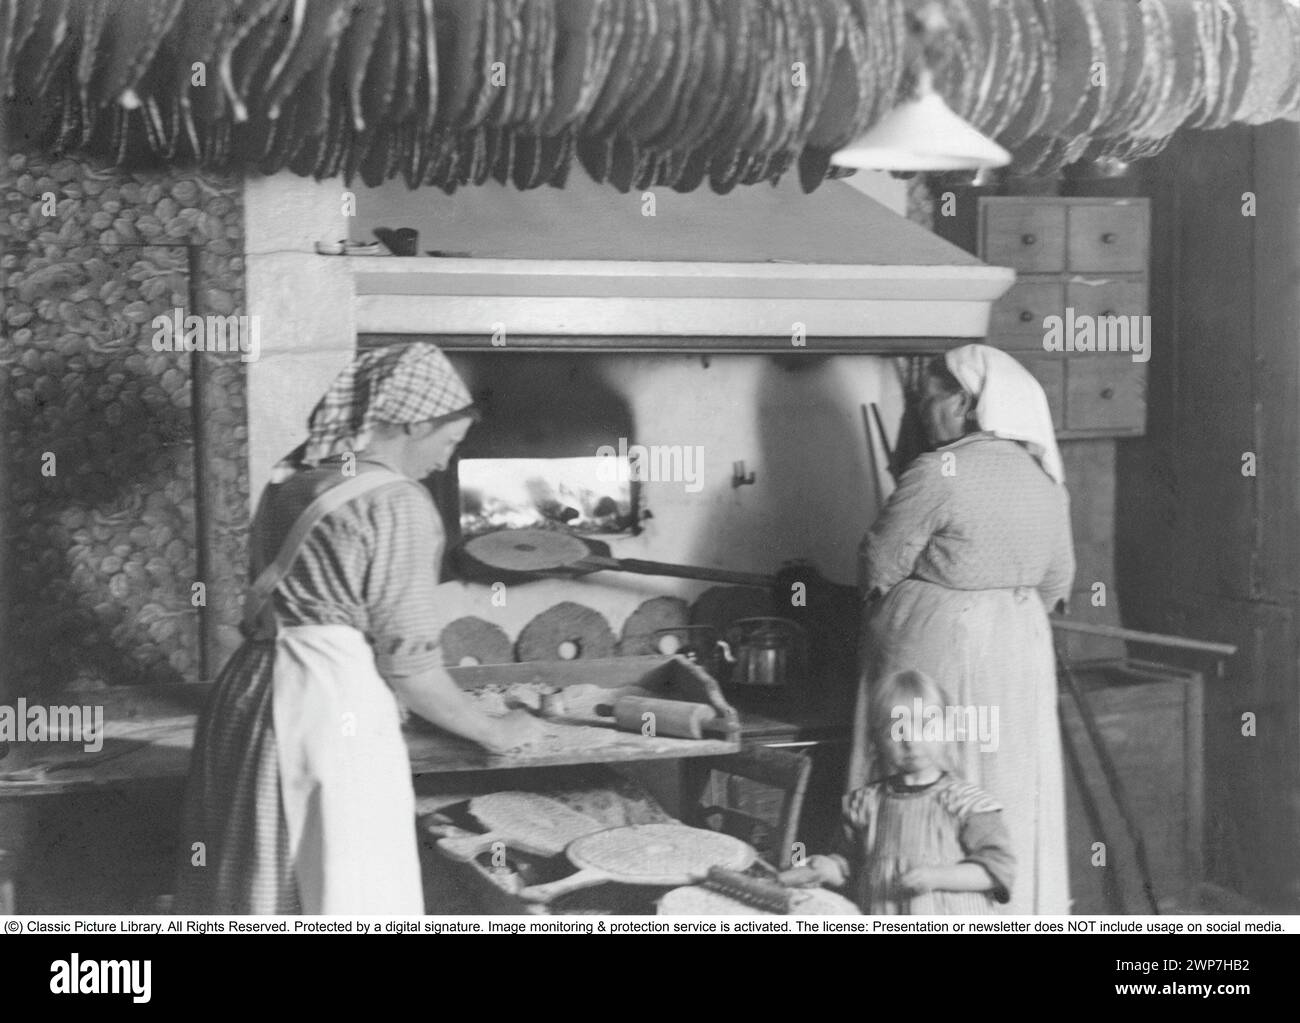 Baking bread 1920s. Interior of a kitchen with women baking crispbread. A flat and dry type of bread, containing mostly rye flour. The baking oven is heated with firewood.  The traditional baking tool like rolling pins is visible and a rack of ready baked bread hanging from a pole in the ceiling, thanks to the hole made in the middle of the cripsbread. Picture taken in the small locality Ransäter in Värmland Sweden. Stock Photo